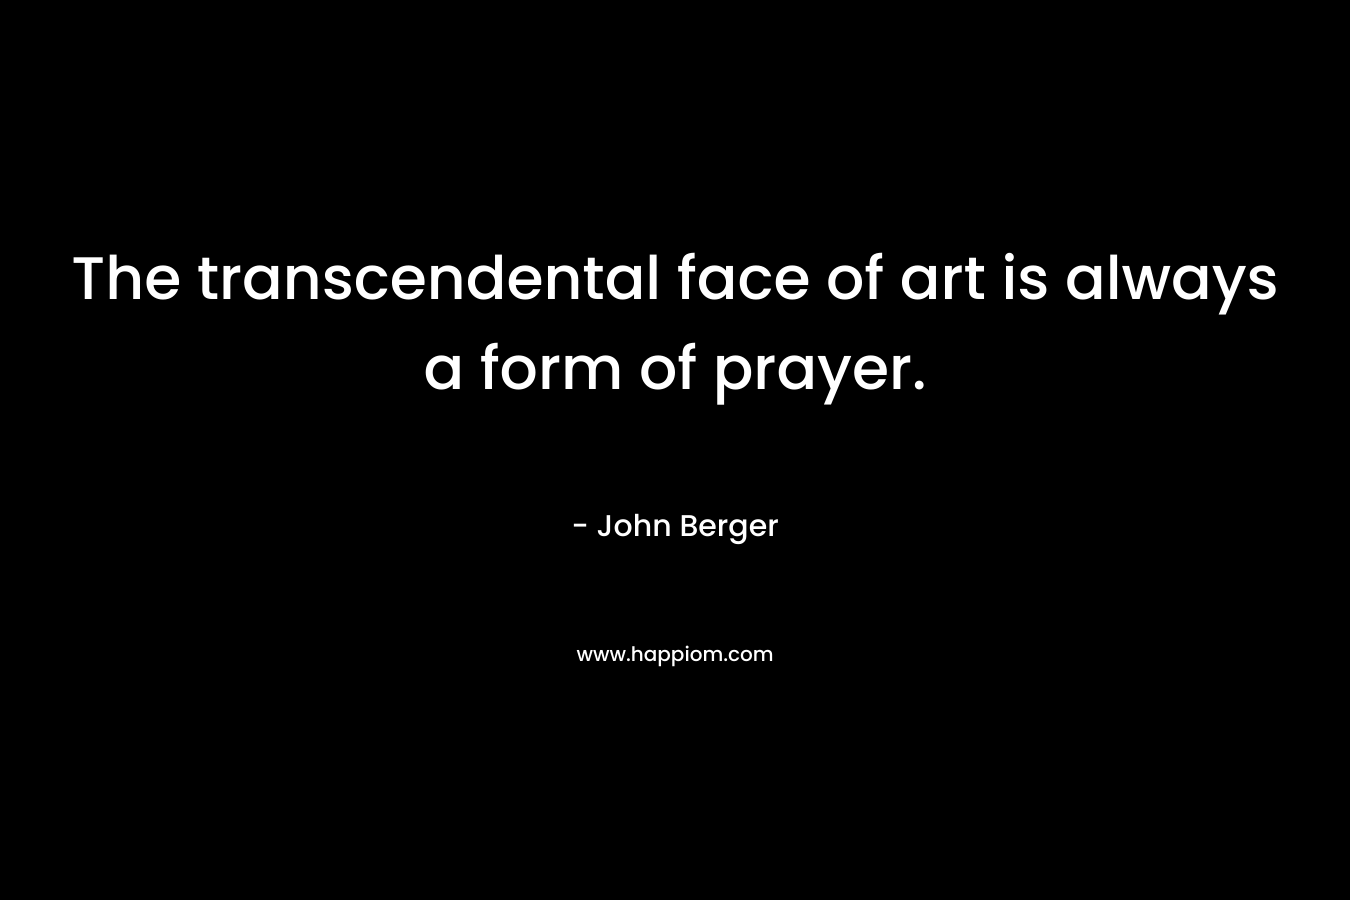 The transcendental face of art is always a form of prayer.